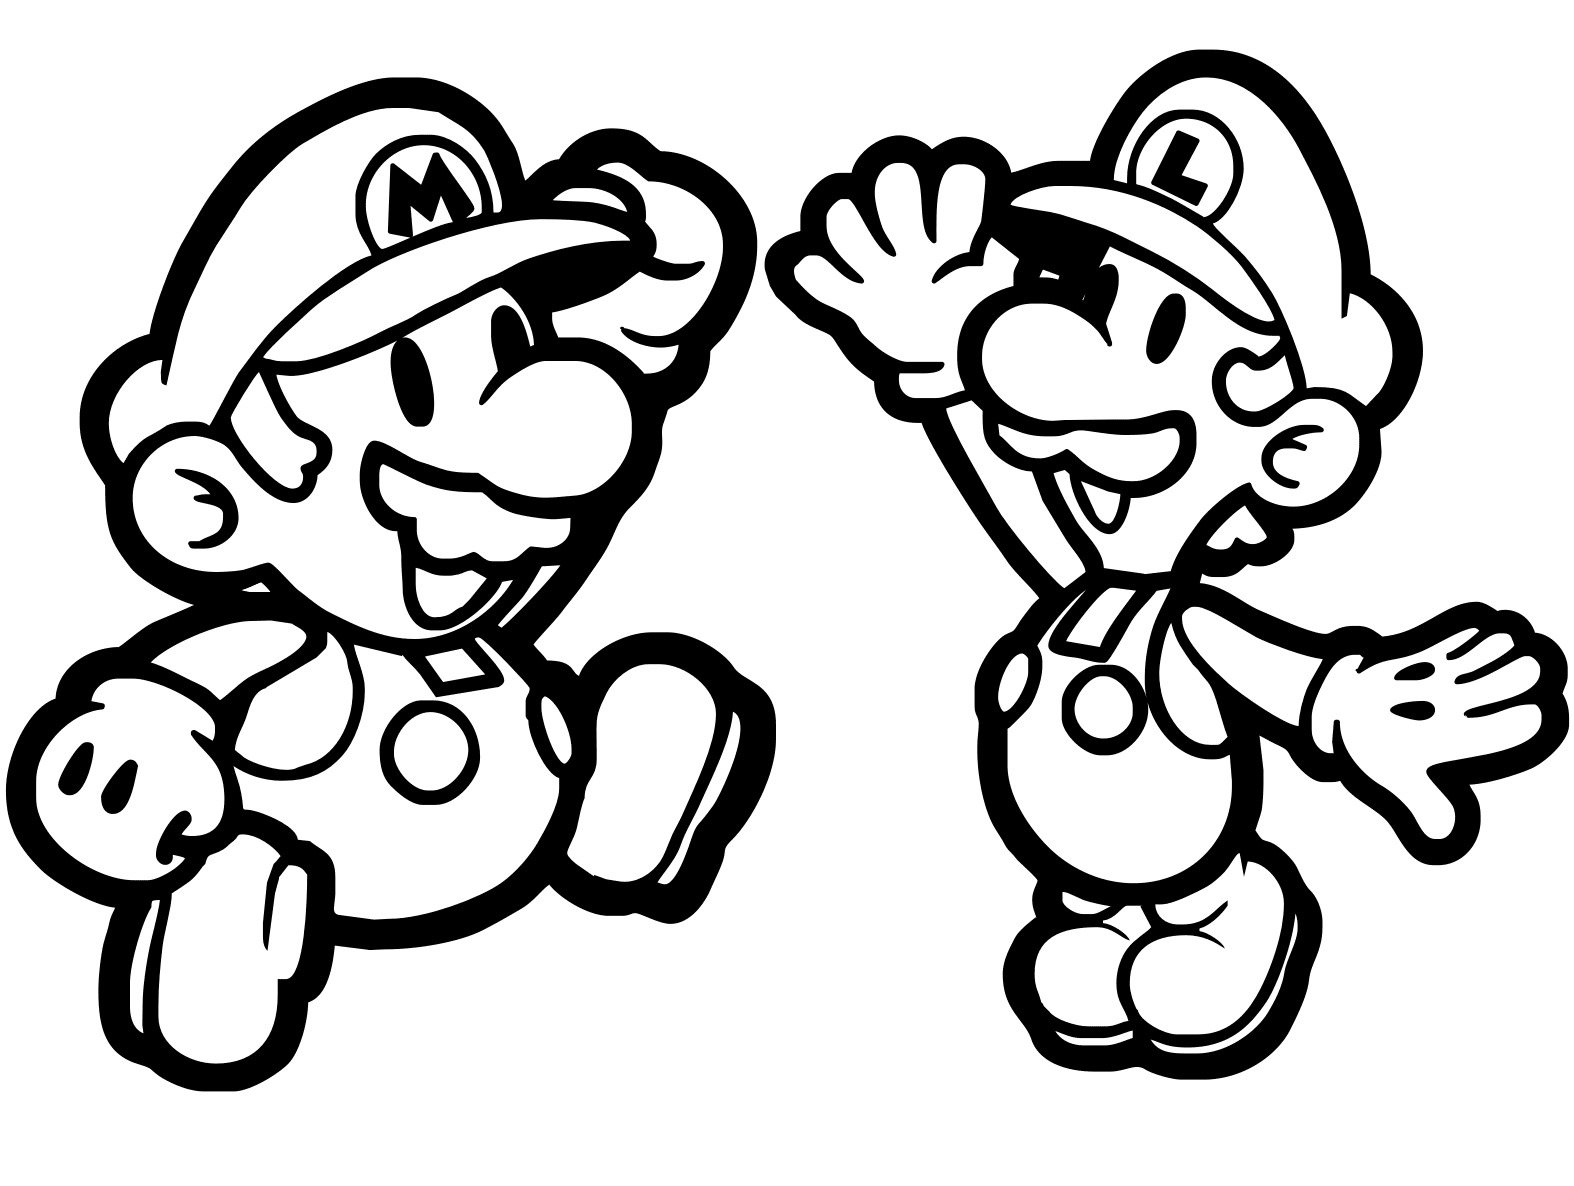 Chibi Mario and Luigi high-five Coloring Page